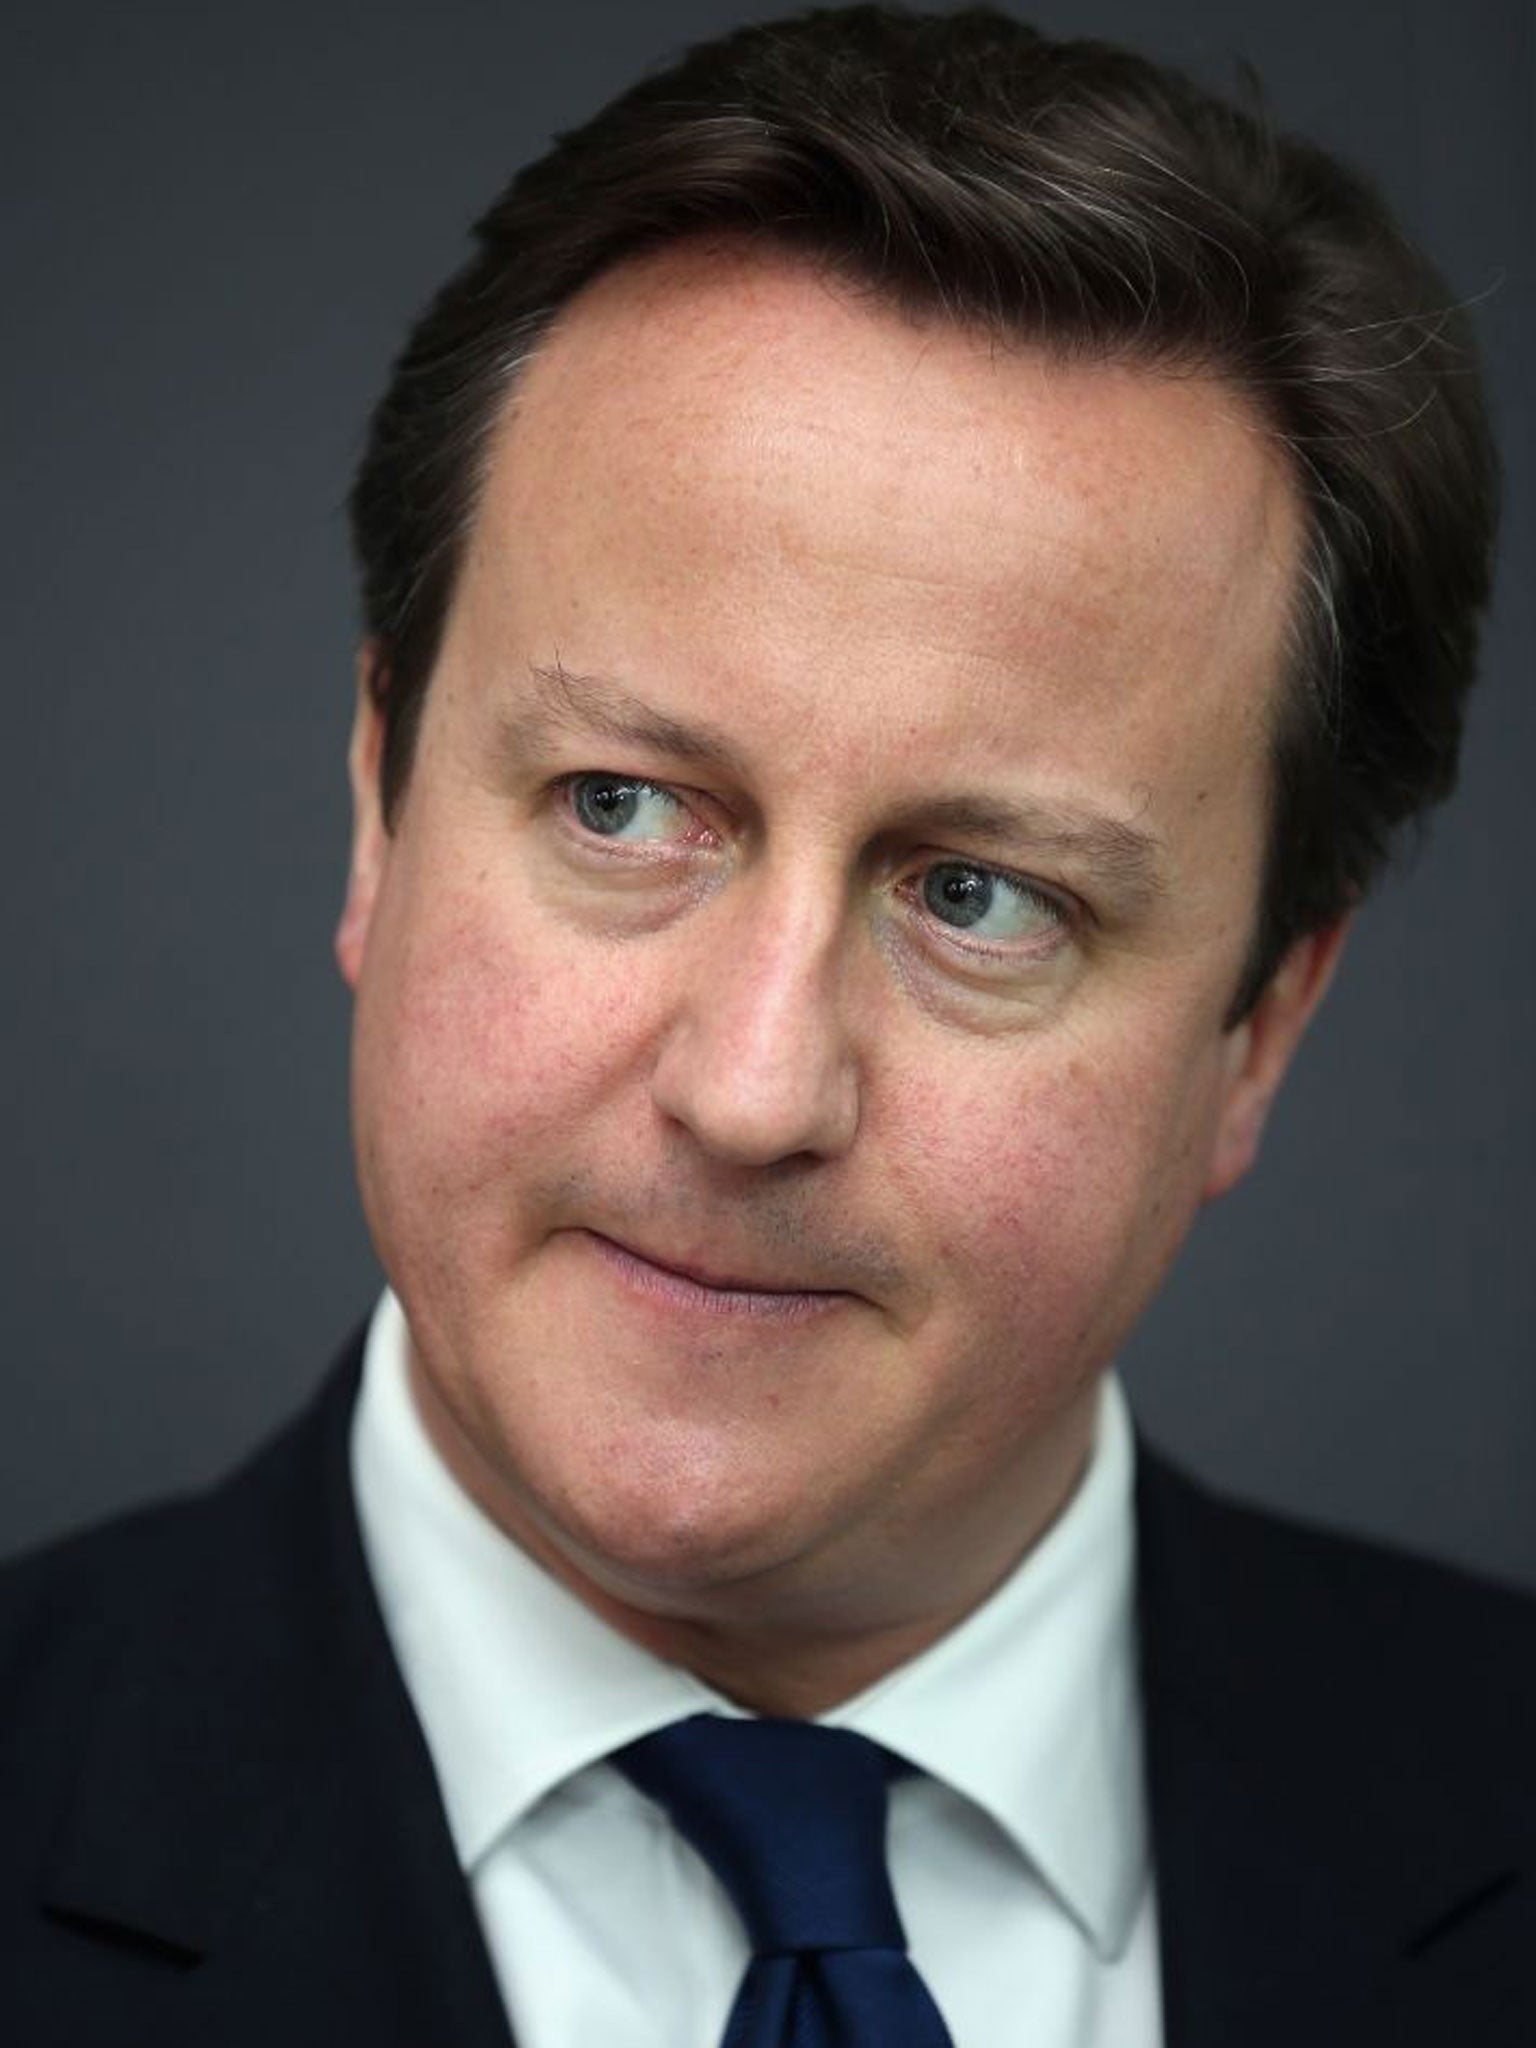 David Cameron scored dismally in a poll among party activists